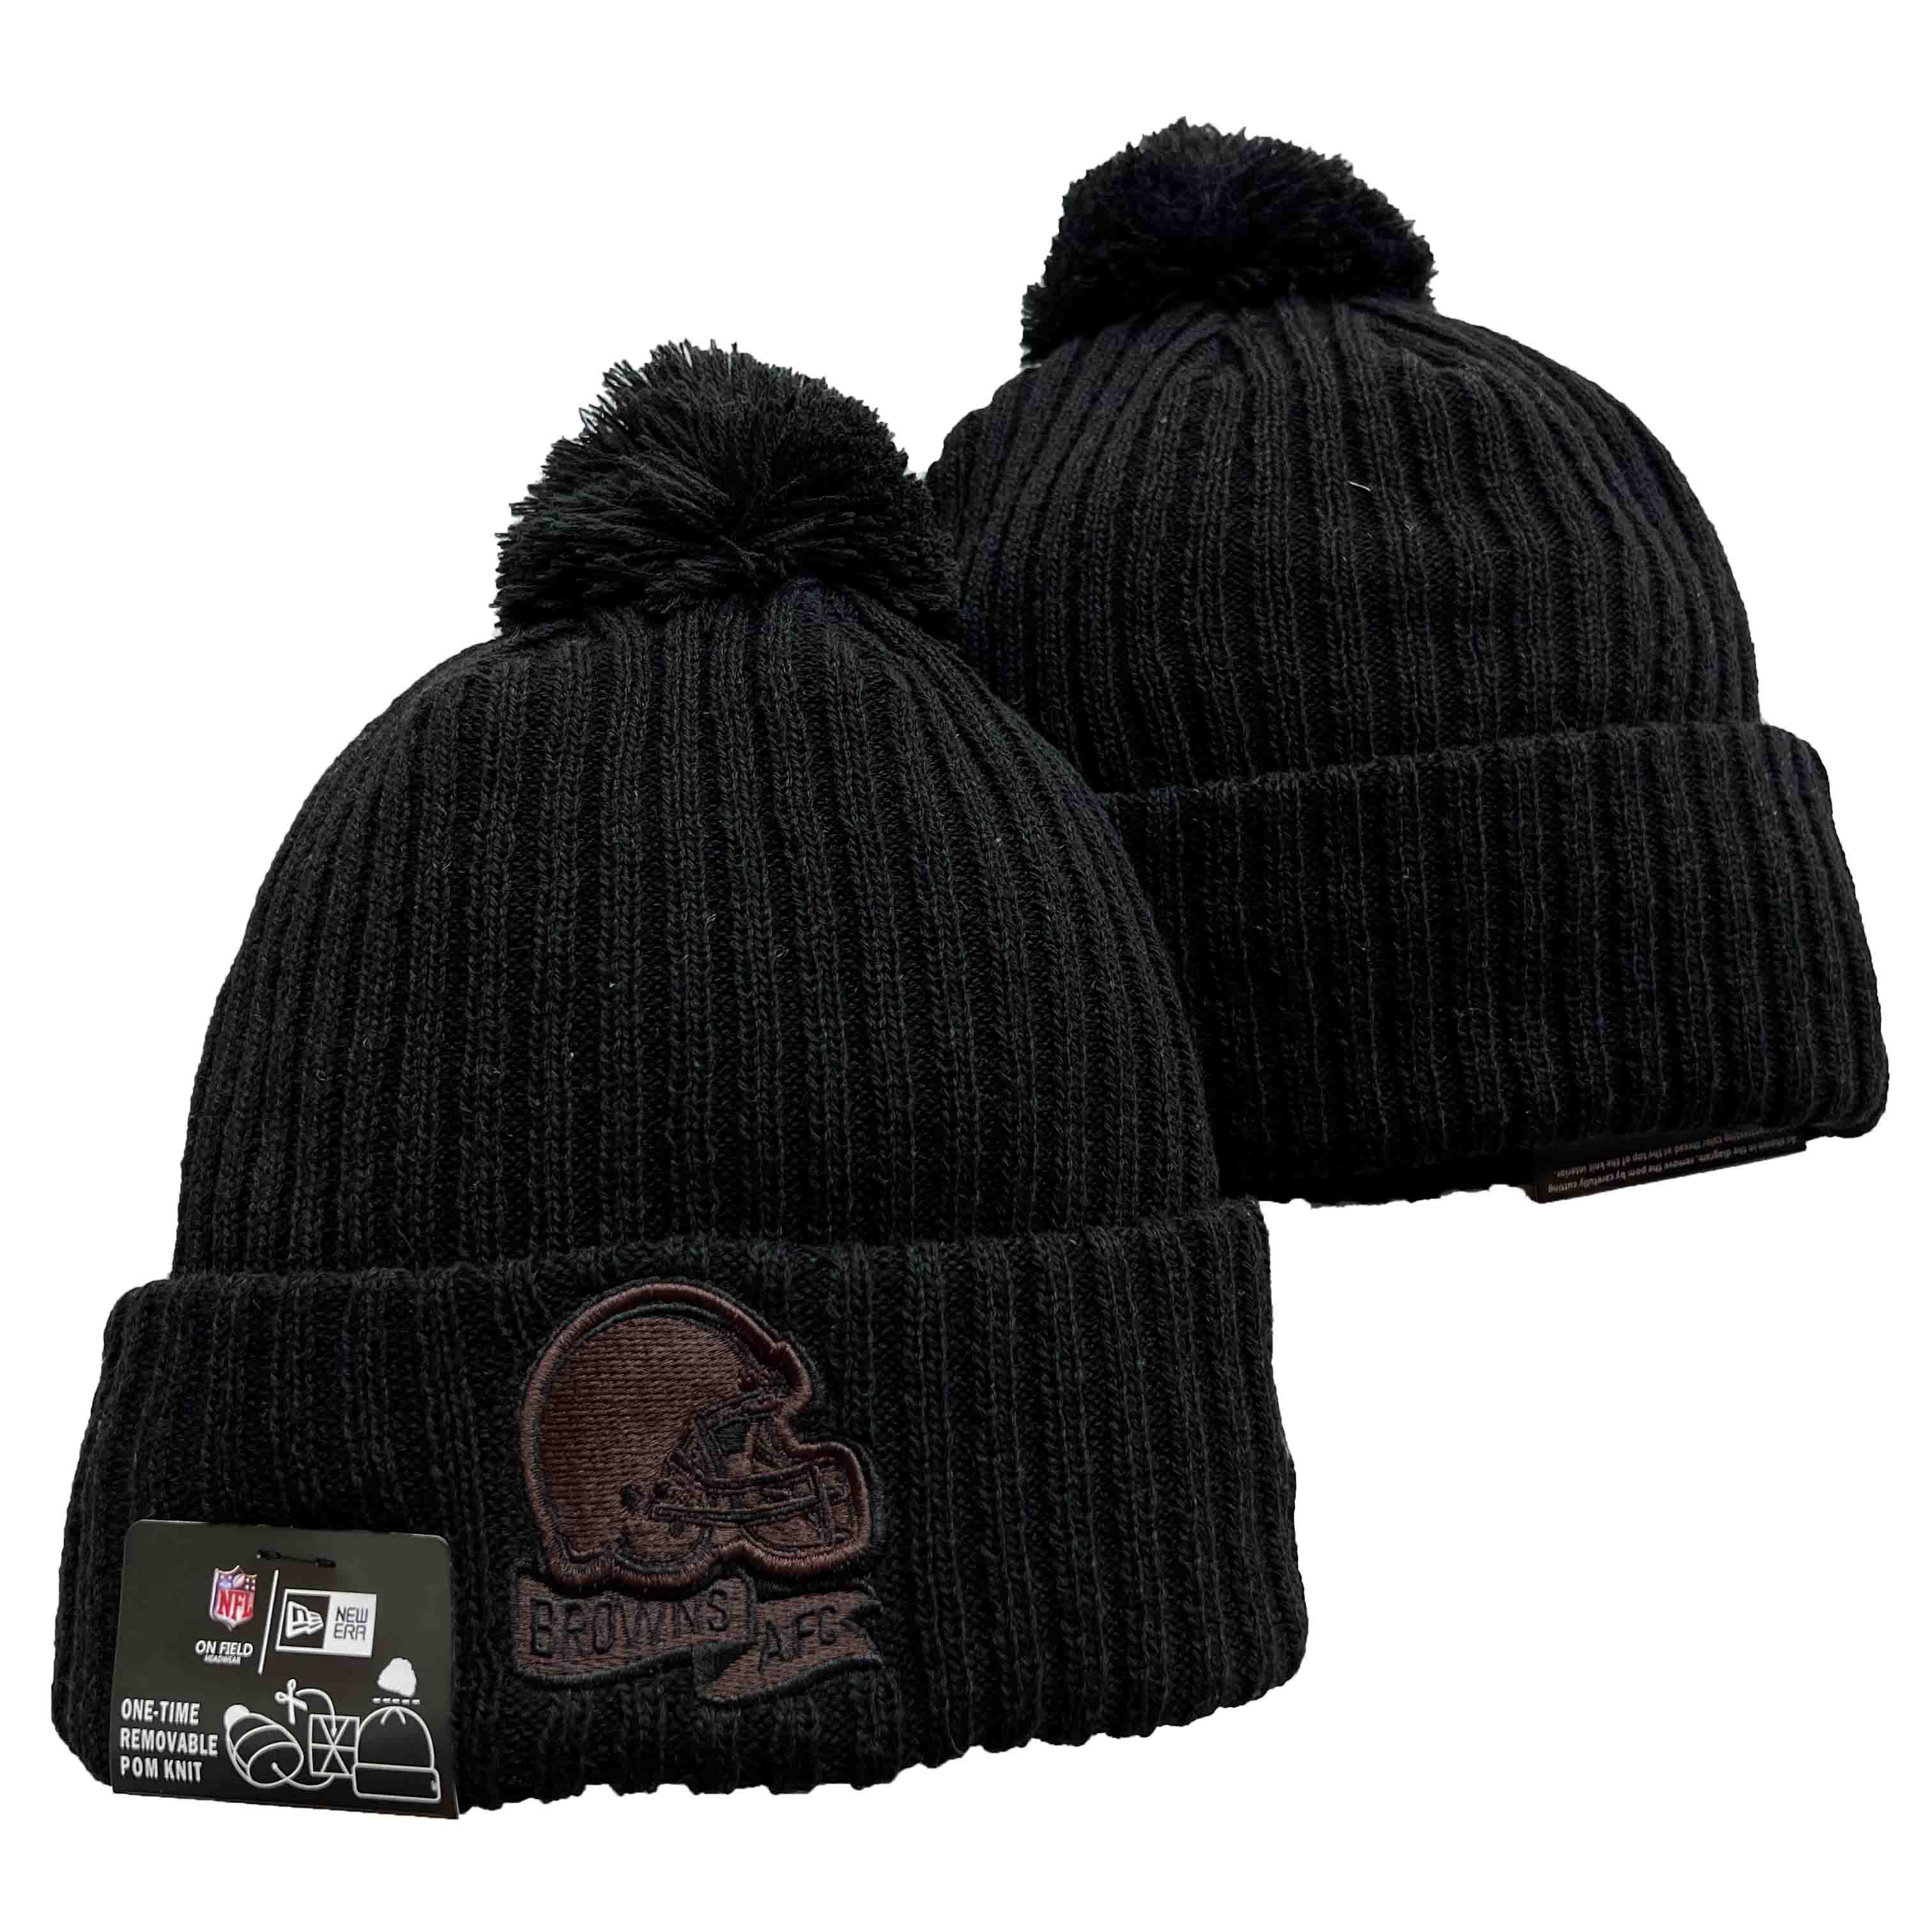 Cleveland Browns Knit Hats -8